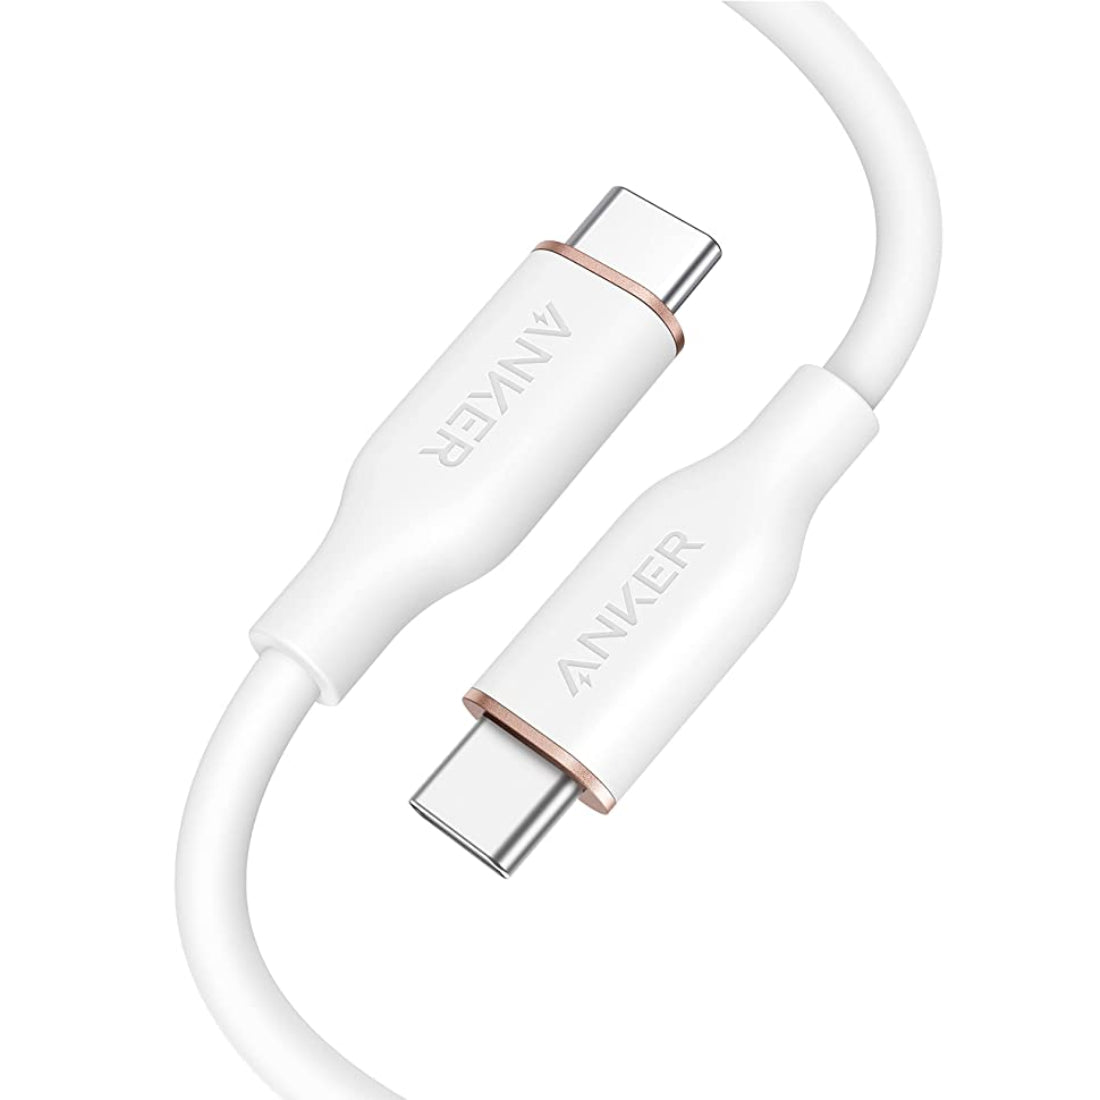 Anker PowerLine III Flow 100W USB-C to USB-C 6ft Cable - White - كابل - Store 974 | ستور ٩٧٤